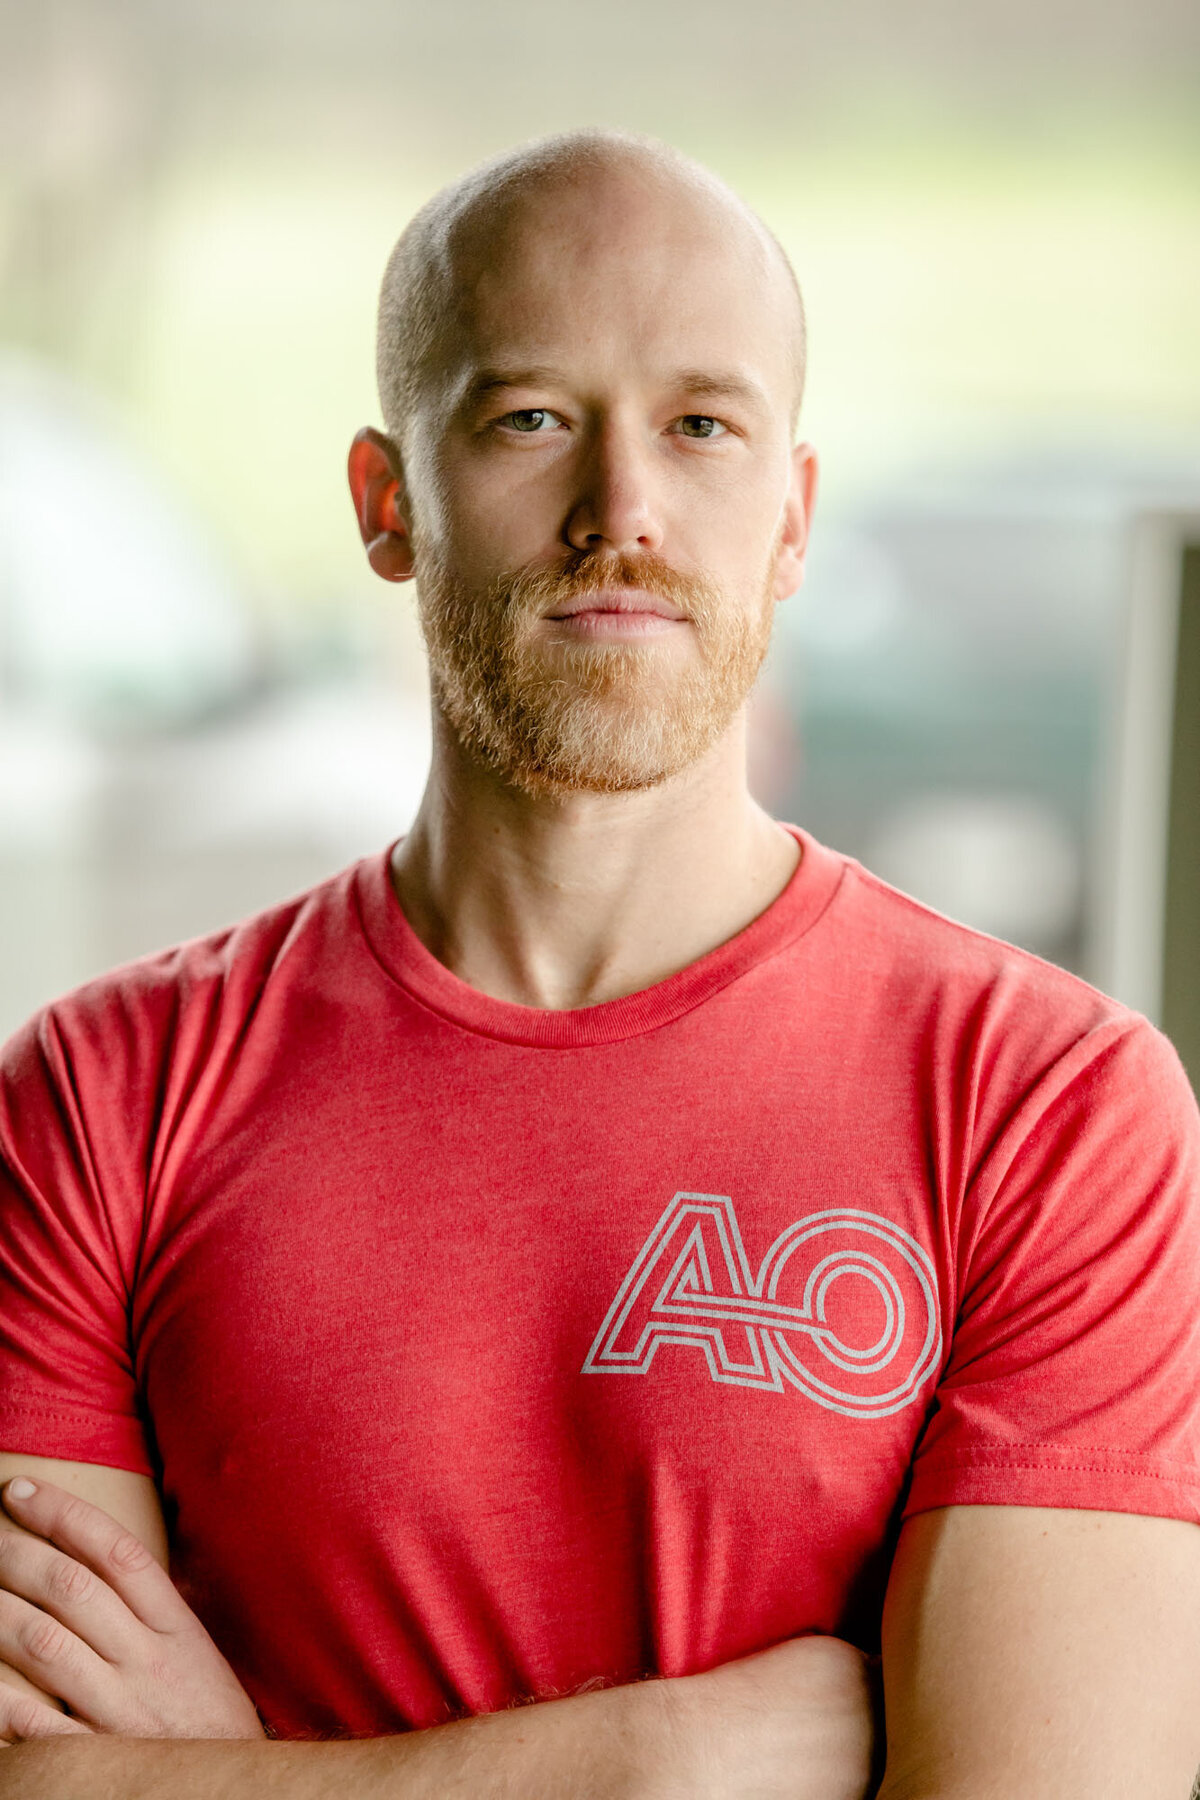 athletic-outcomes-small-business-branding-brio-photography-austin-20